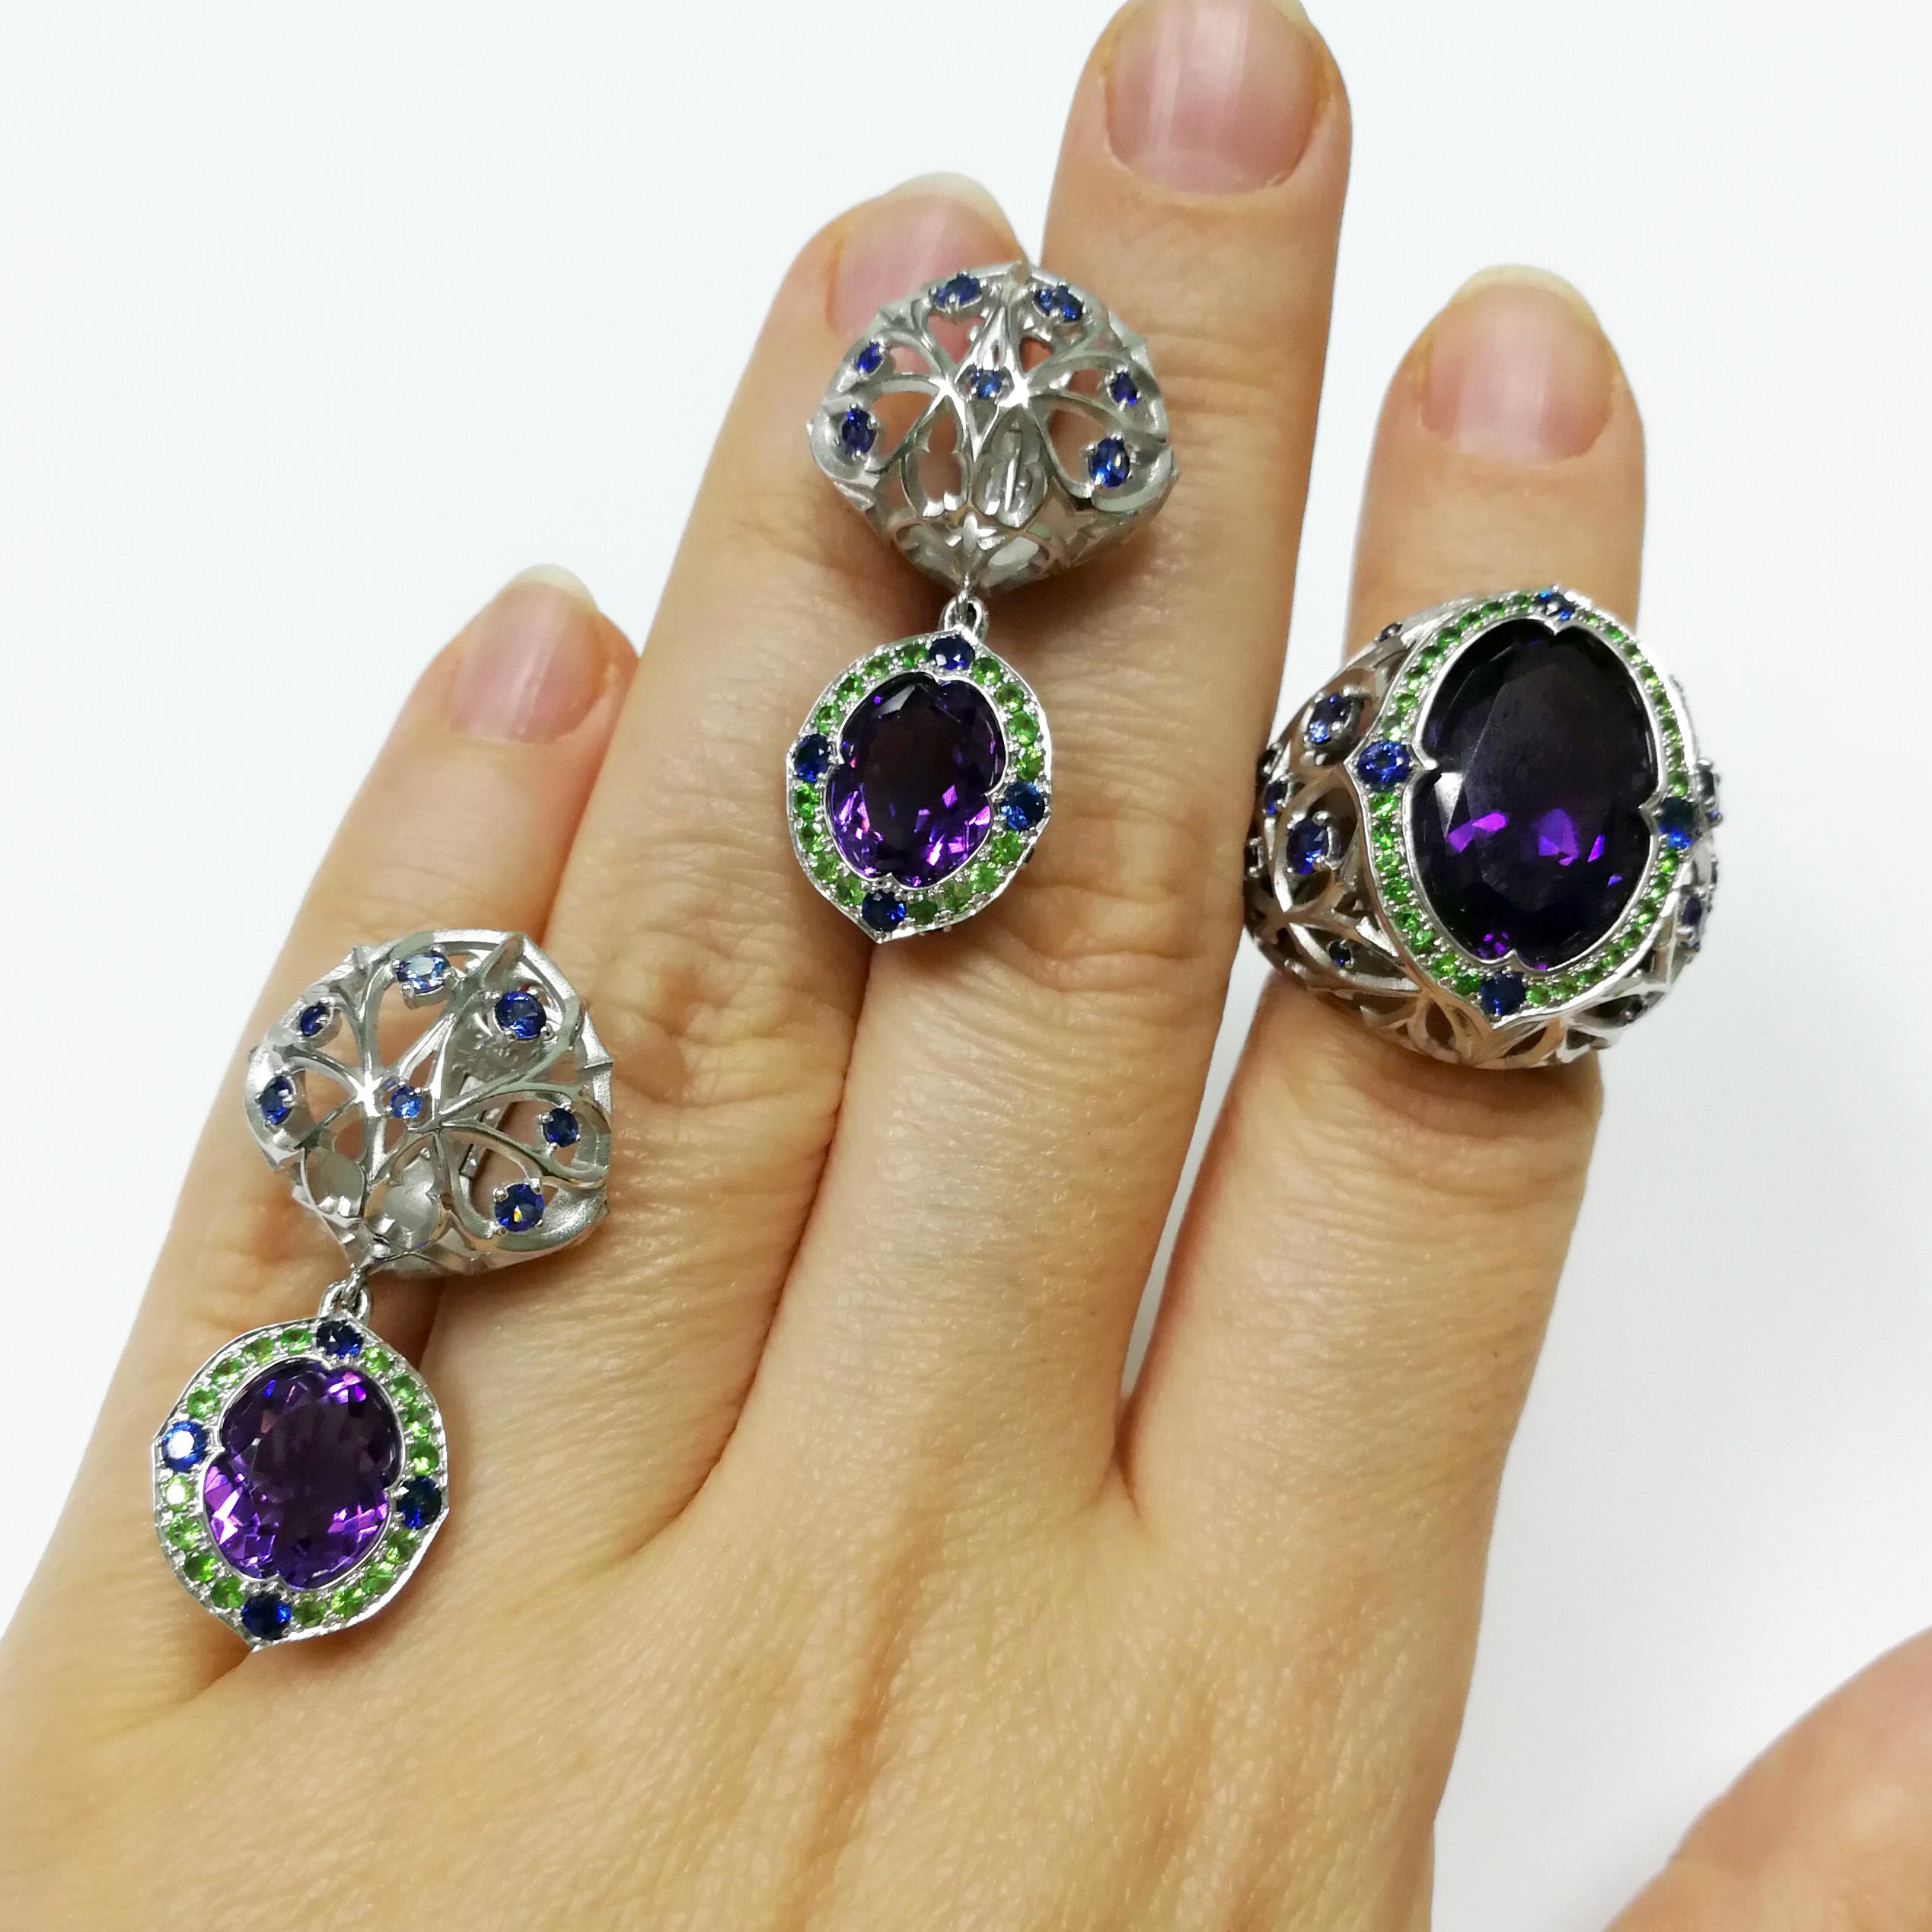 Amethyst Blue Sapphires Tsavorites 18 Karat White Gold Gothic Suite
Imagine a Gothic cathedral with all its grace, upward aspiration and colorful stained glass windows. At the idea of this collection, our designers were inspired by all this beauty.